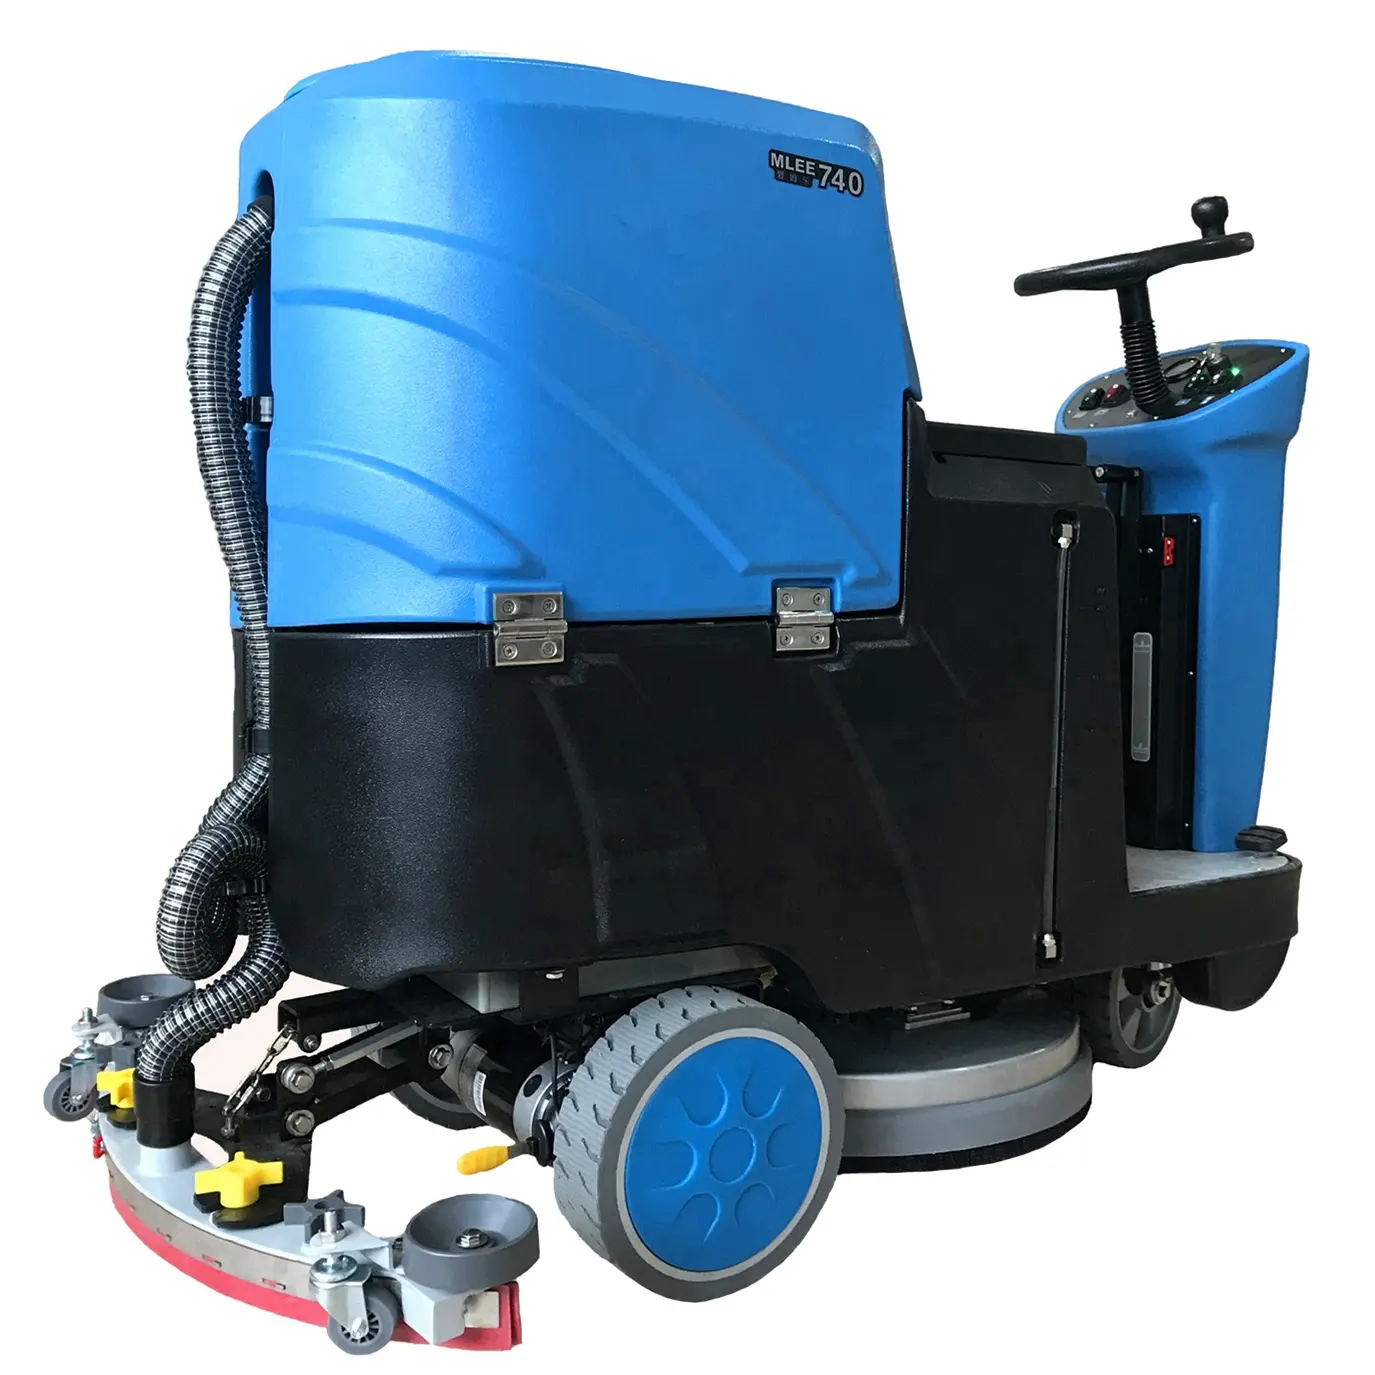 MLEE-740AU Auto Factory Cleaning Machine Marble Timber Concrete Ride On Floor Scrubber